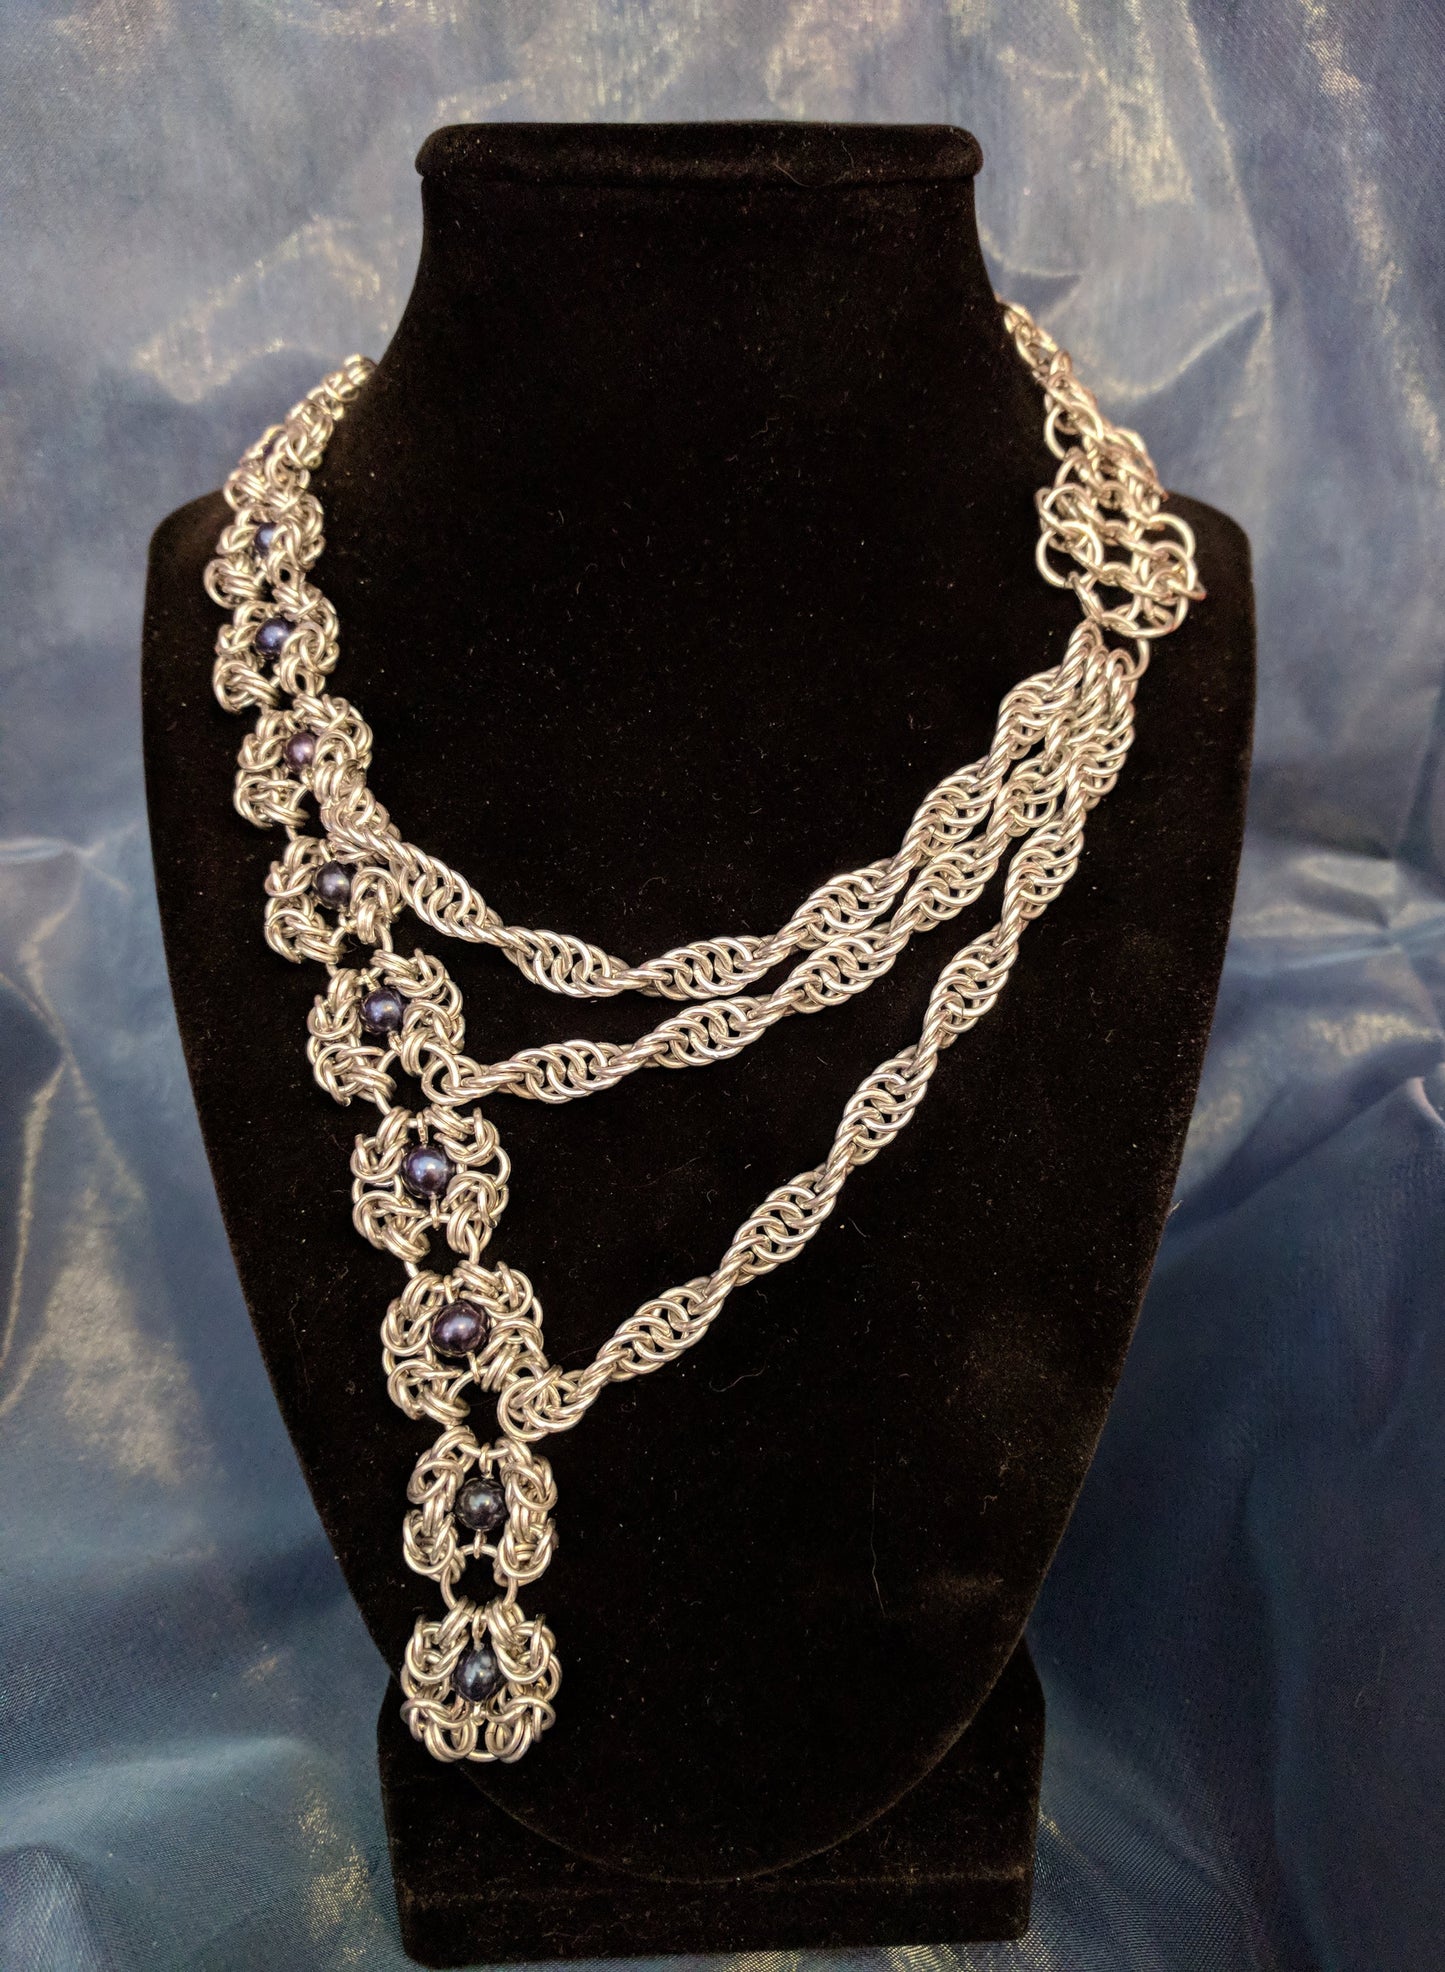 Silver asymmetrical chainmail necklace. At left are a series of Romanov weave flowers with black pearl bead centers, the right side is a series of three twisted ropes increasing in length that crosses over and attaches to the Romanov flowers. 